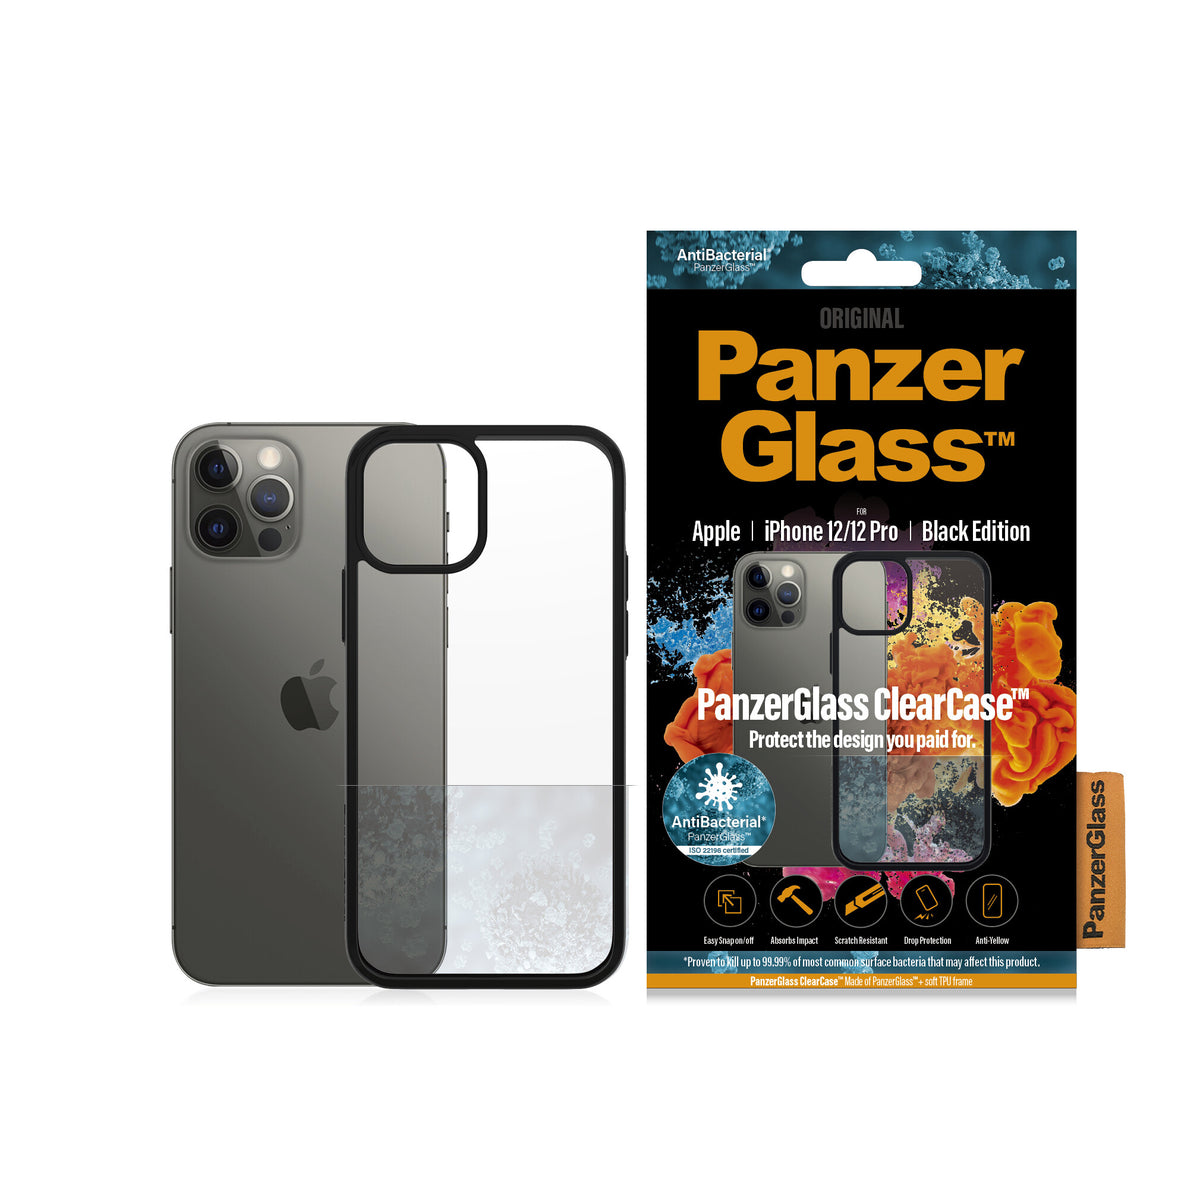 PanzerGlass ® ClearCase for iPhone 12 / 12 Pro in Black